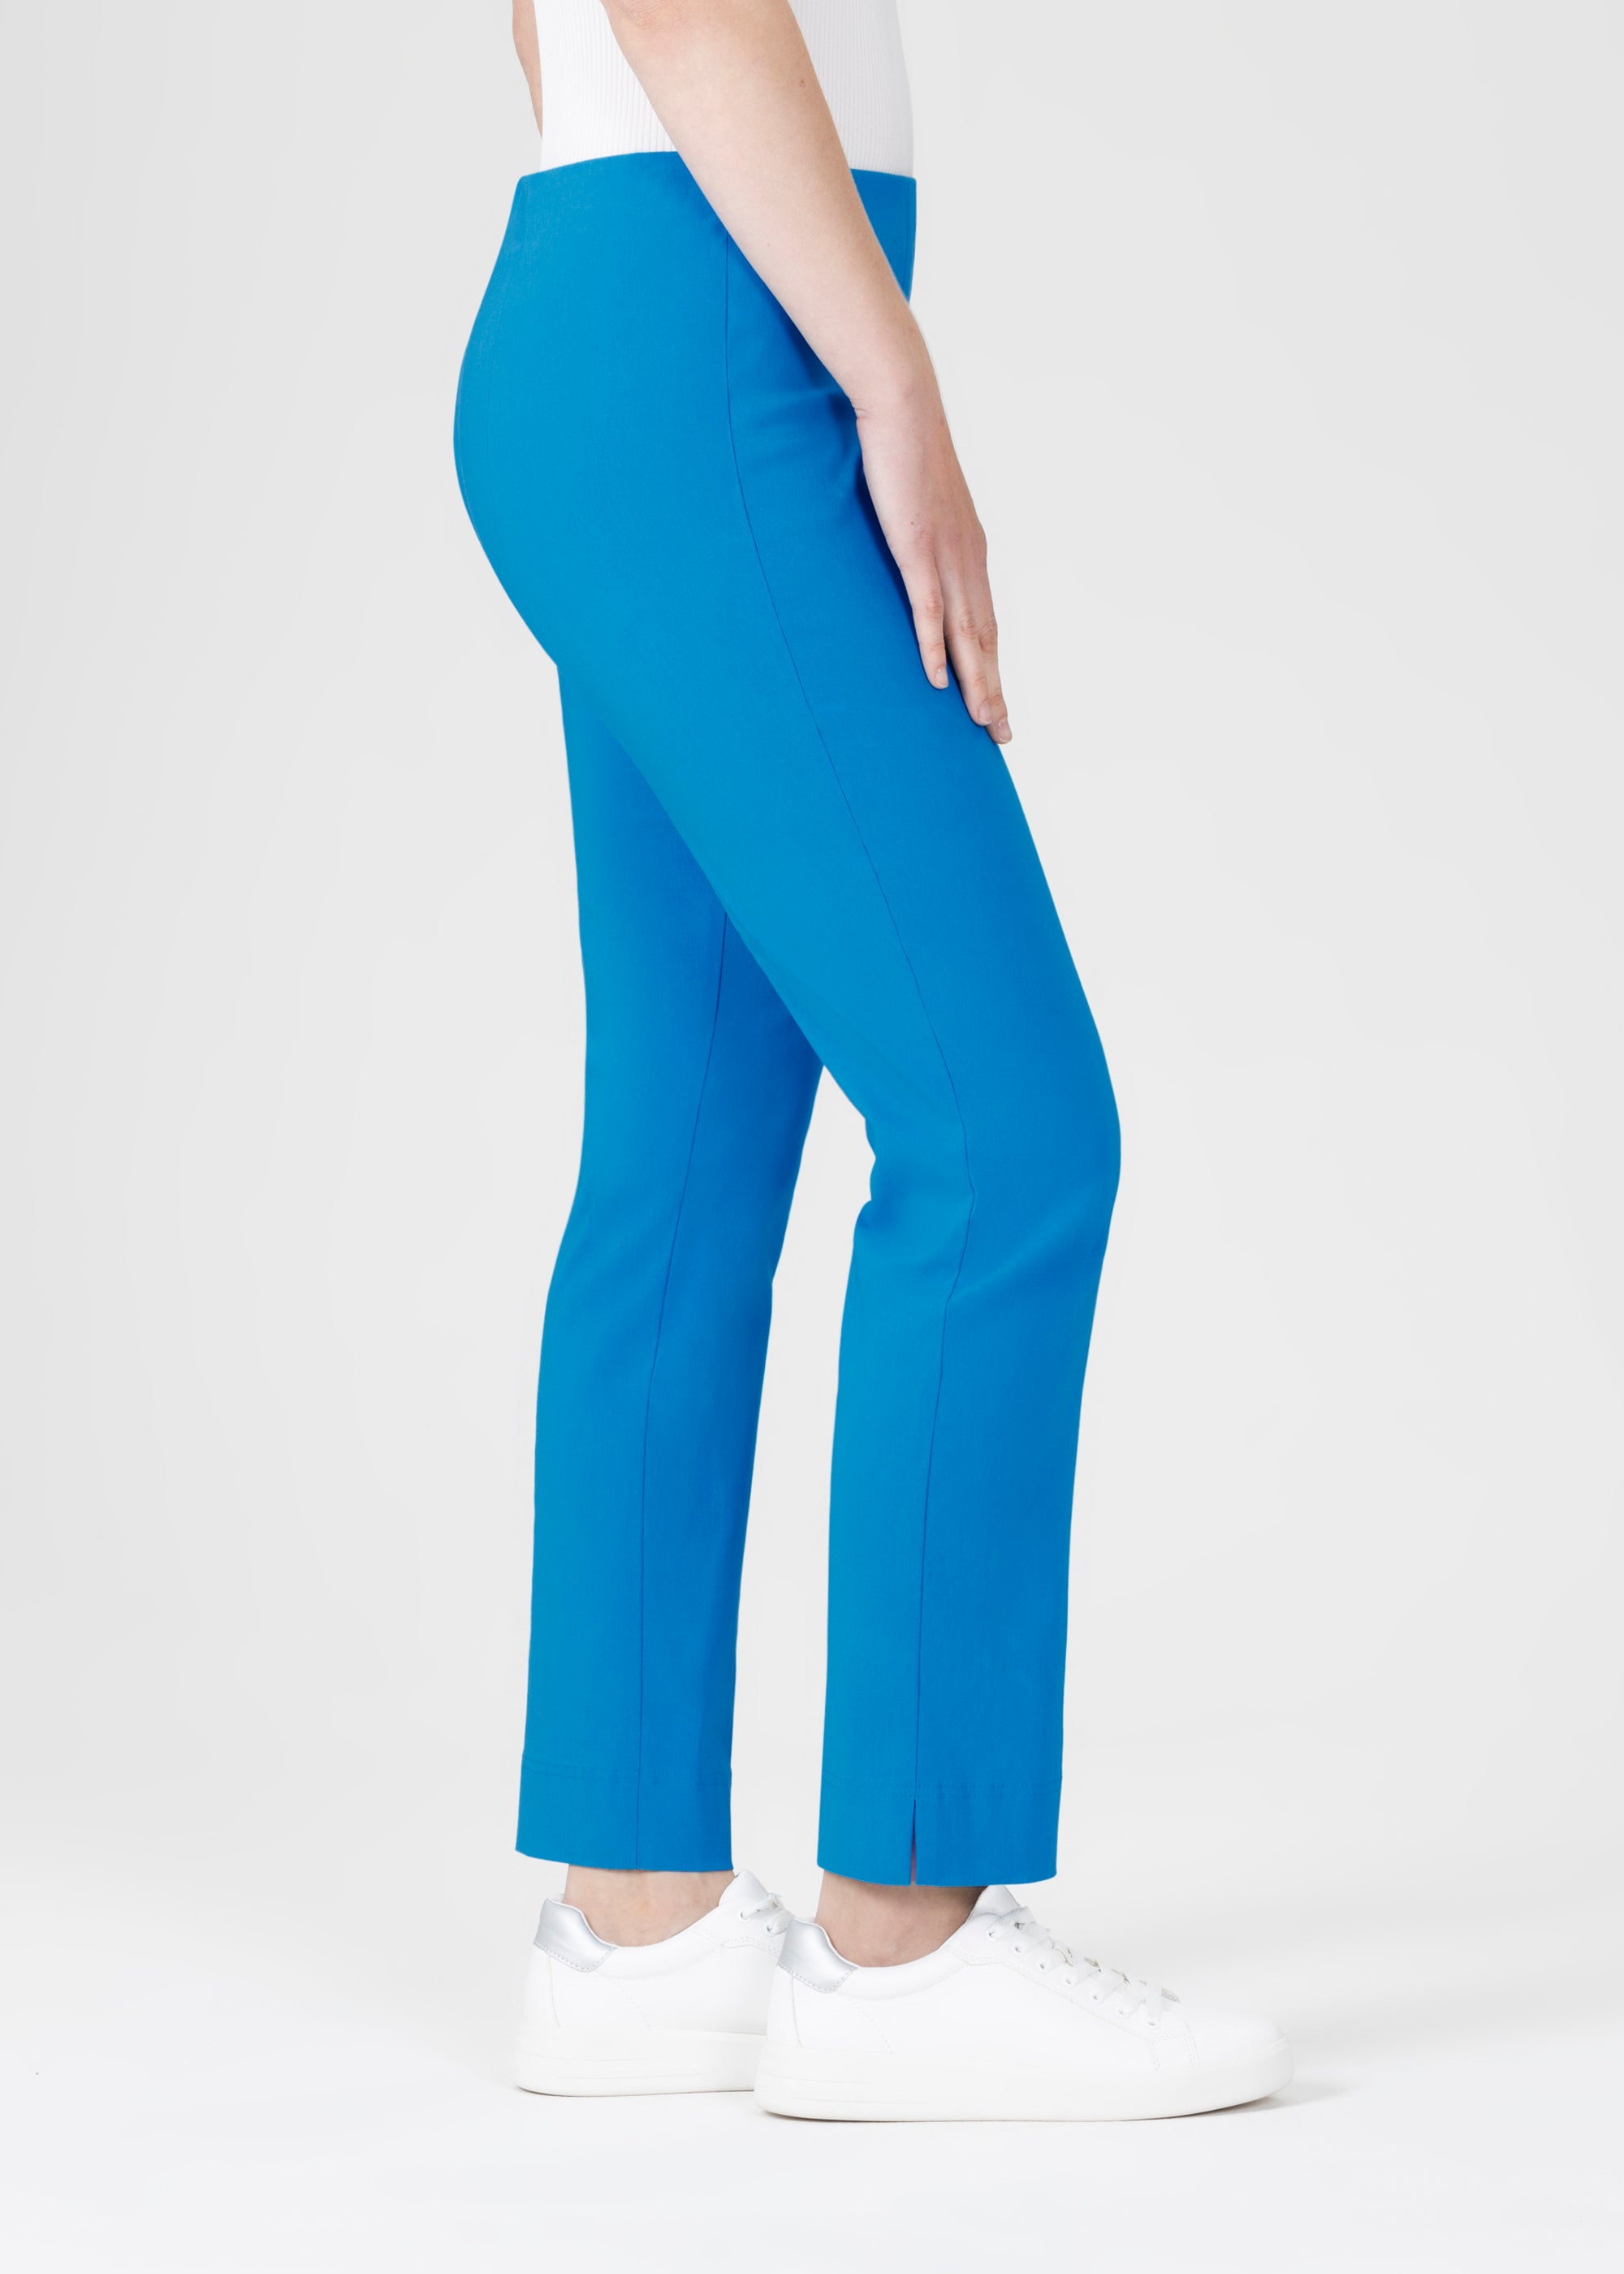 Stretch ankle length in Ina in trousers blue